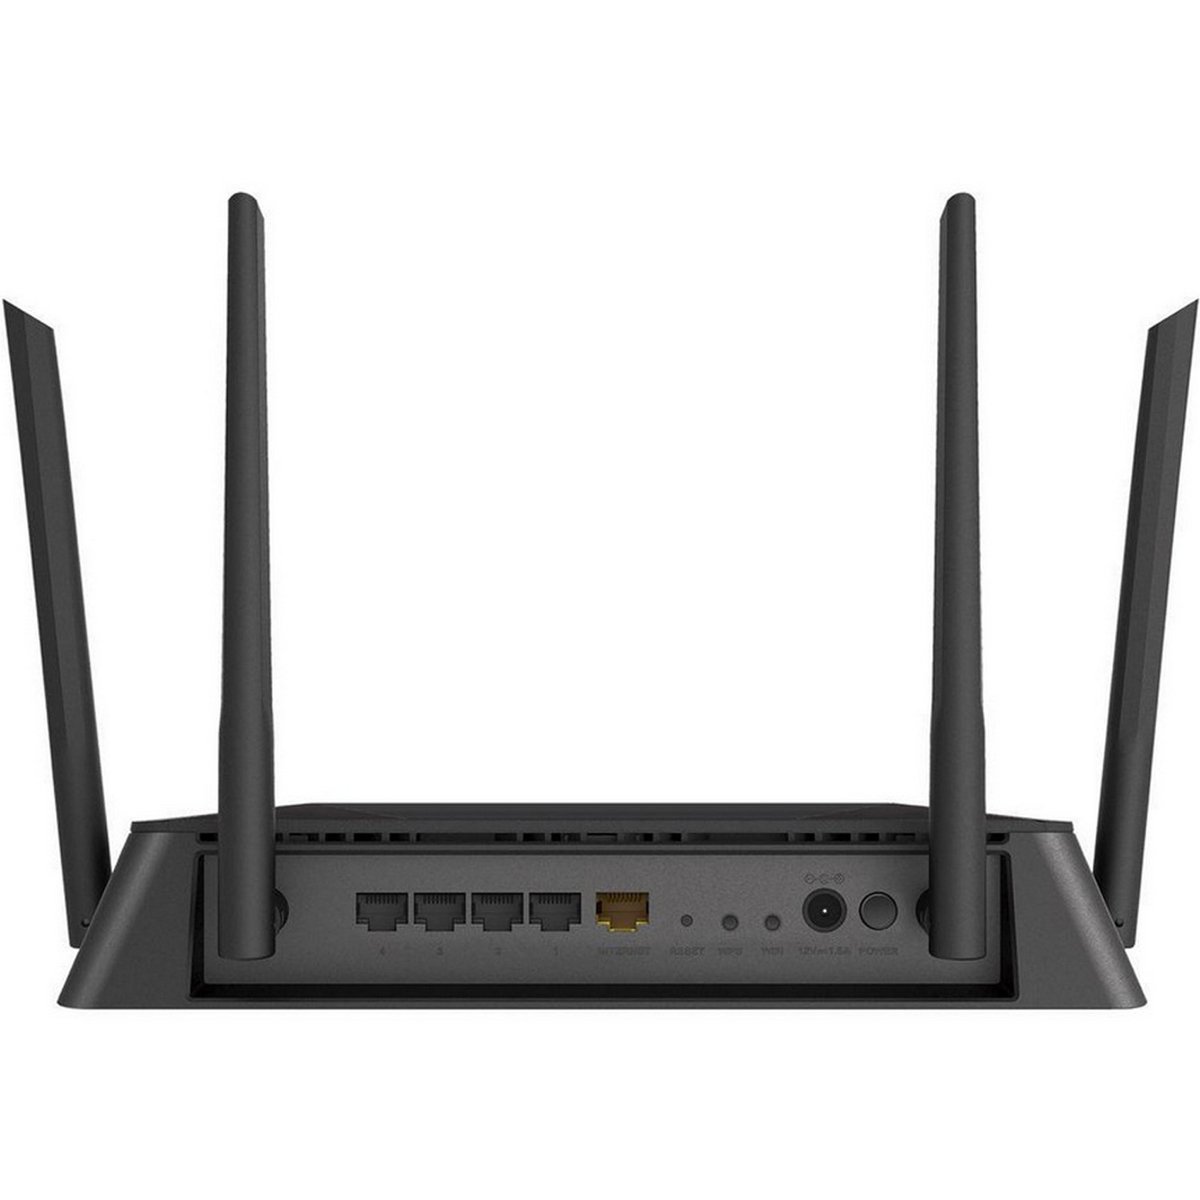 D-Link DIR-867-US AC1750 MU-MIMO Wi-Fi Router